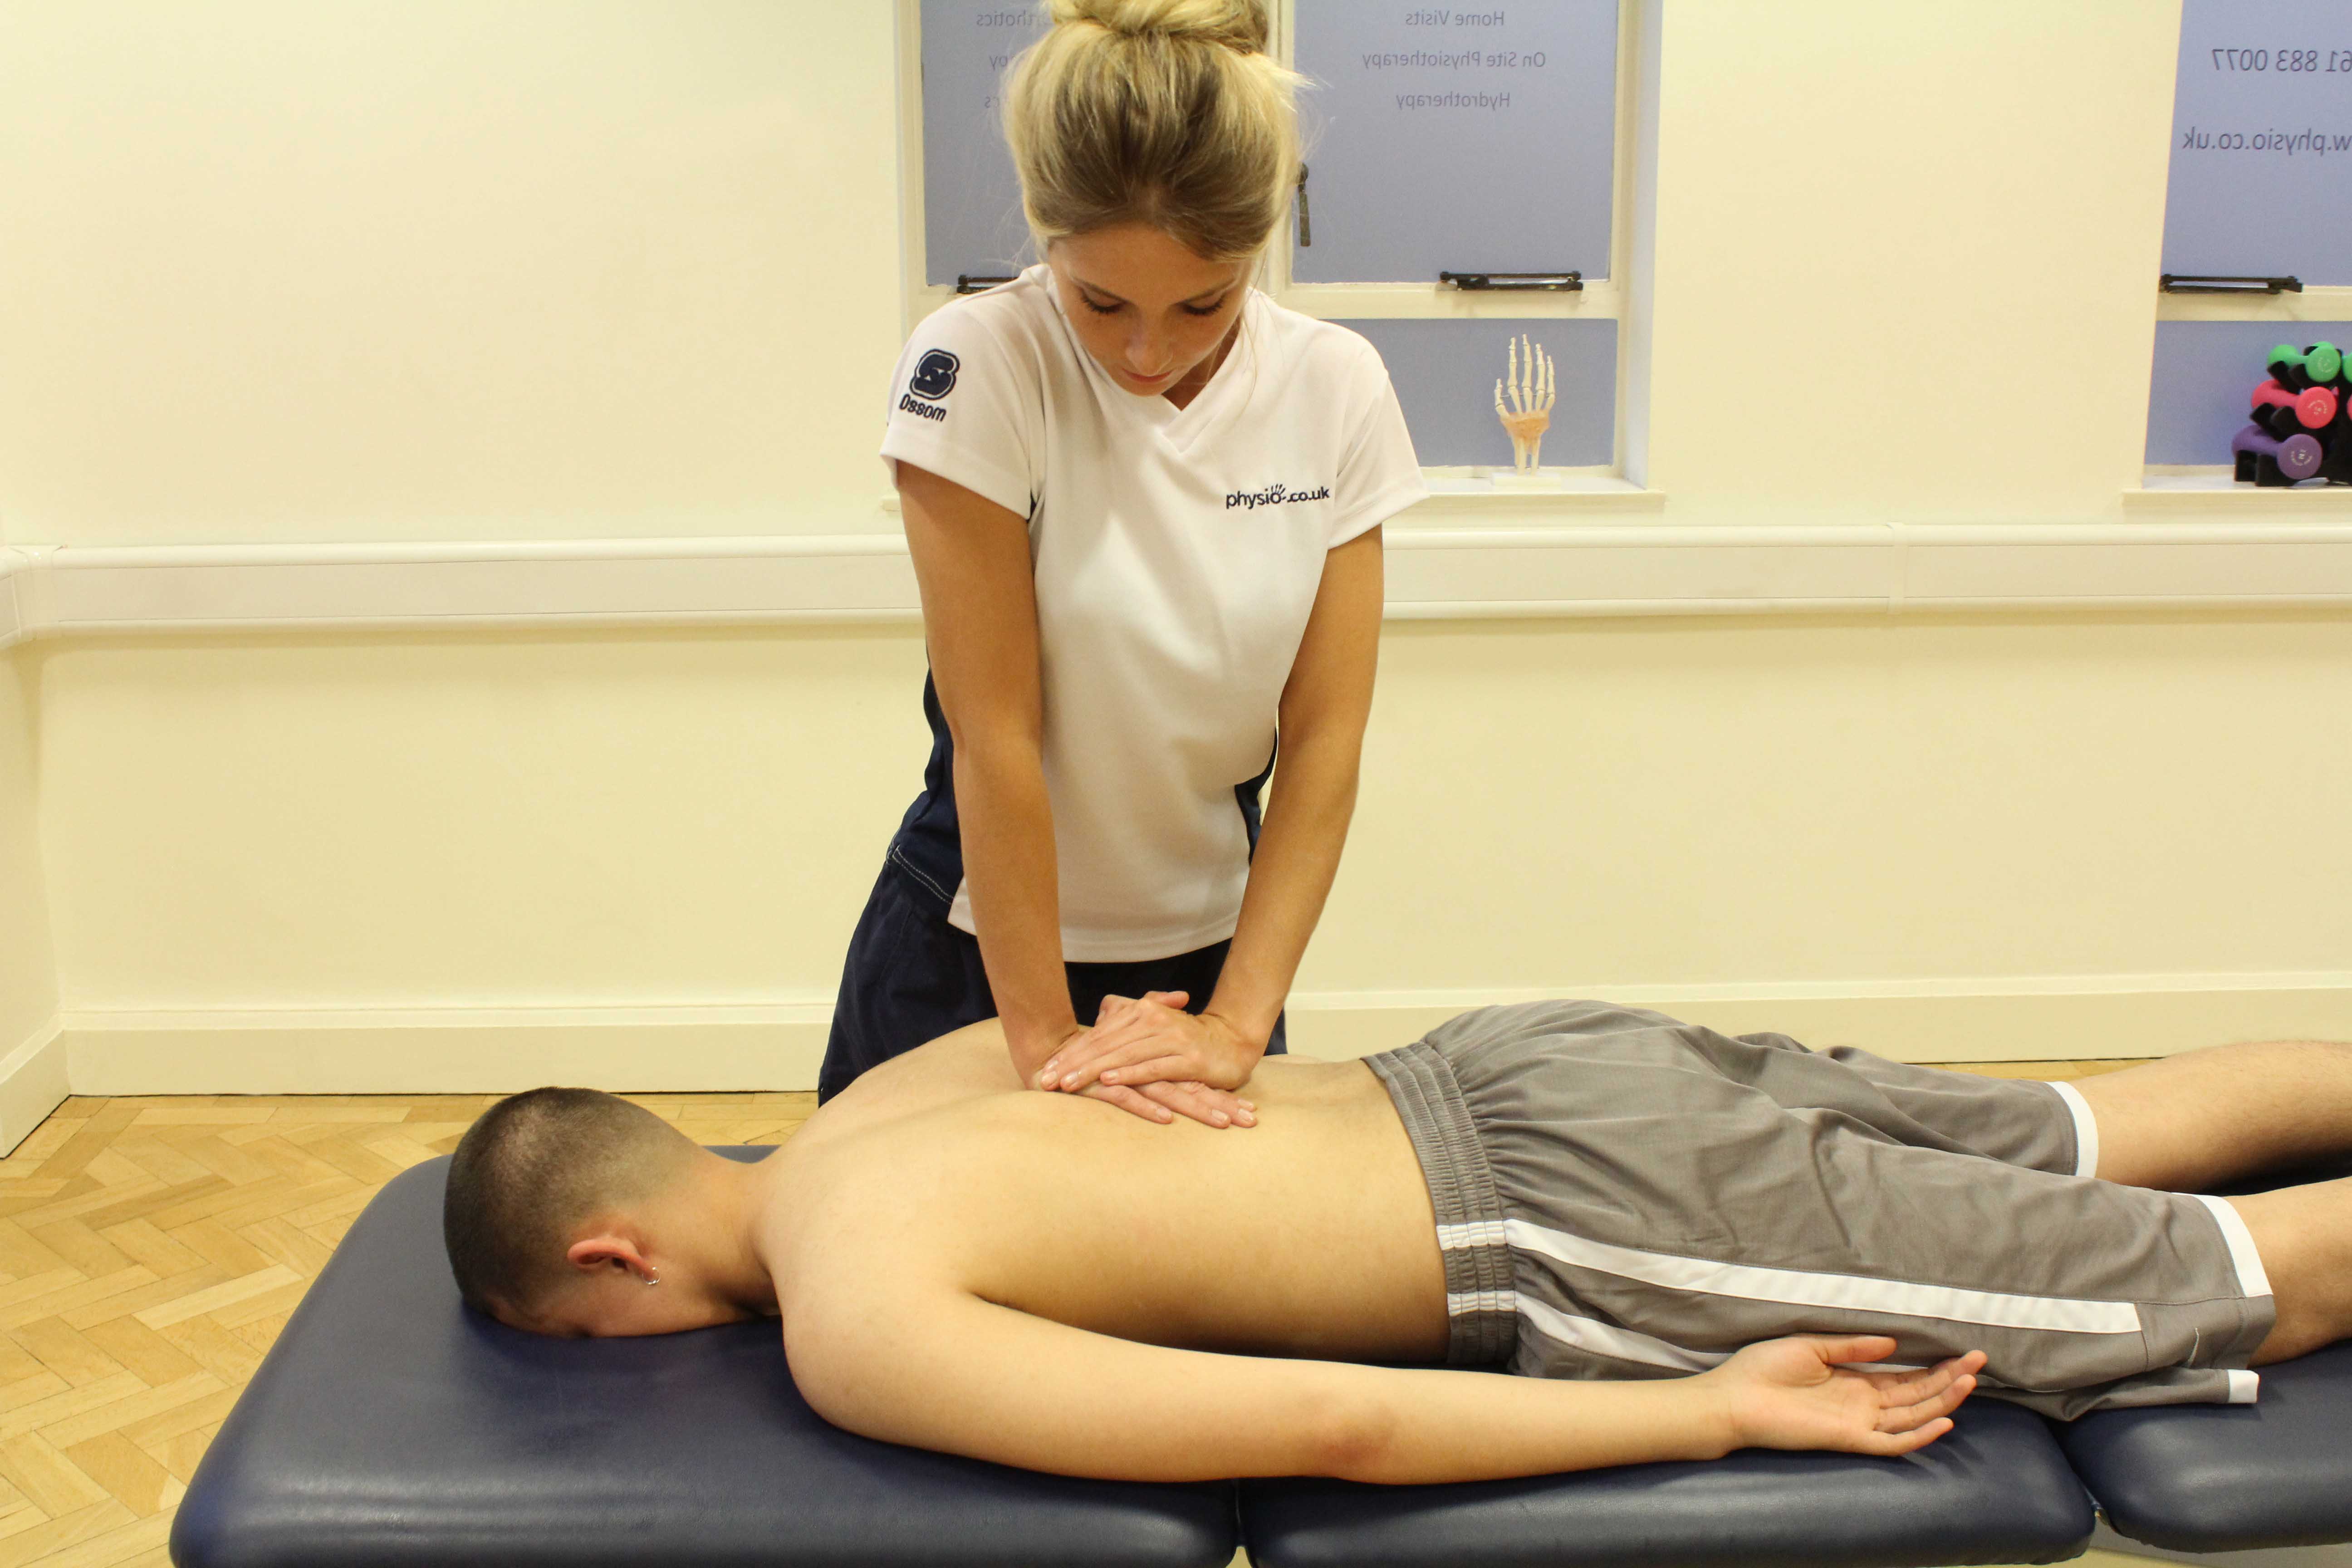 Physiotherapists can help explain why you are experiencing pain and discomfort in your back so you have a better understanding.